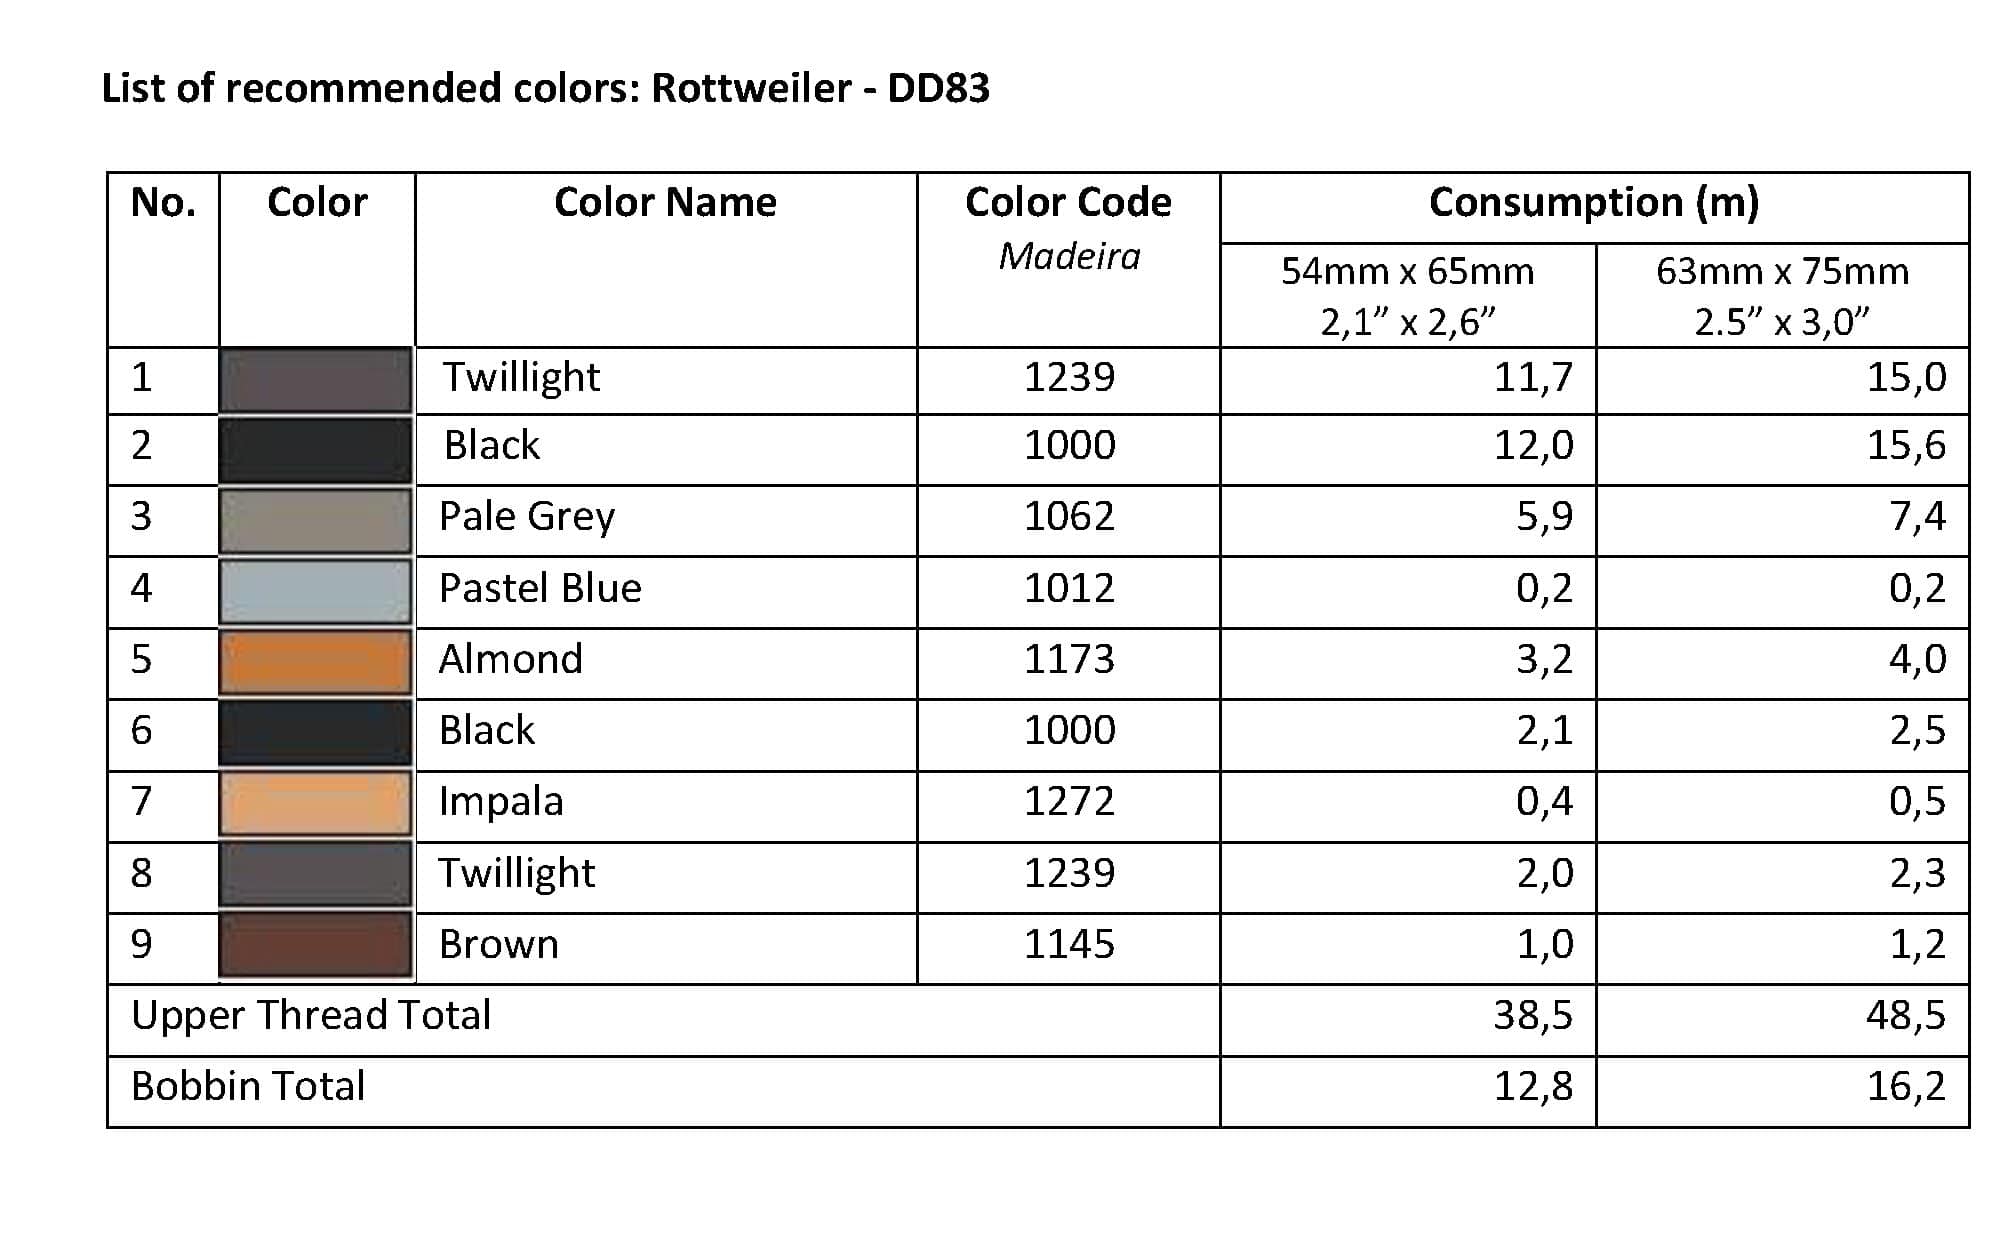 List of Recommended Colors -  Rottweiler DD83